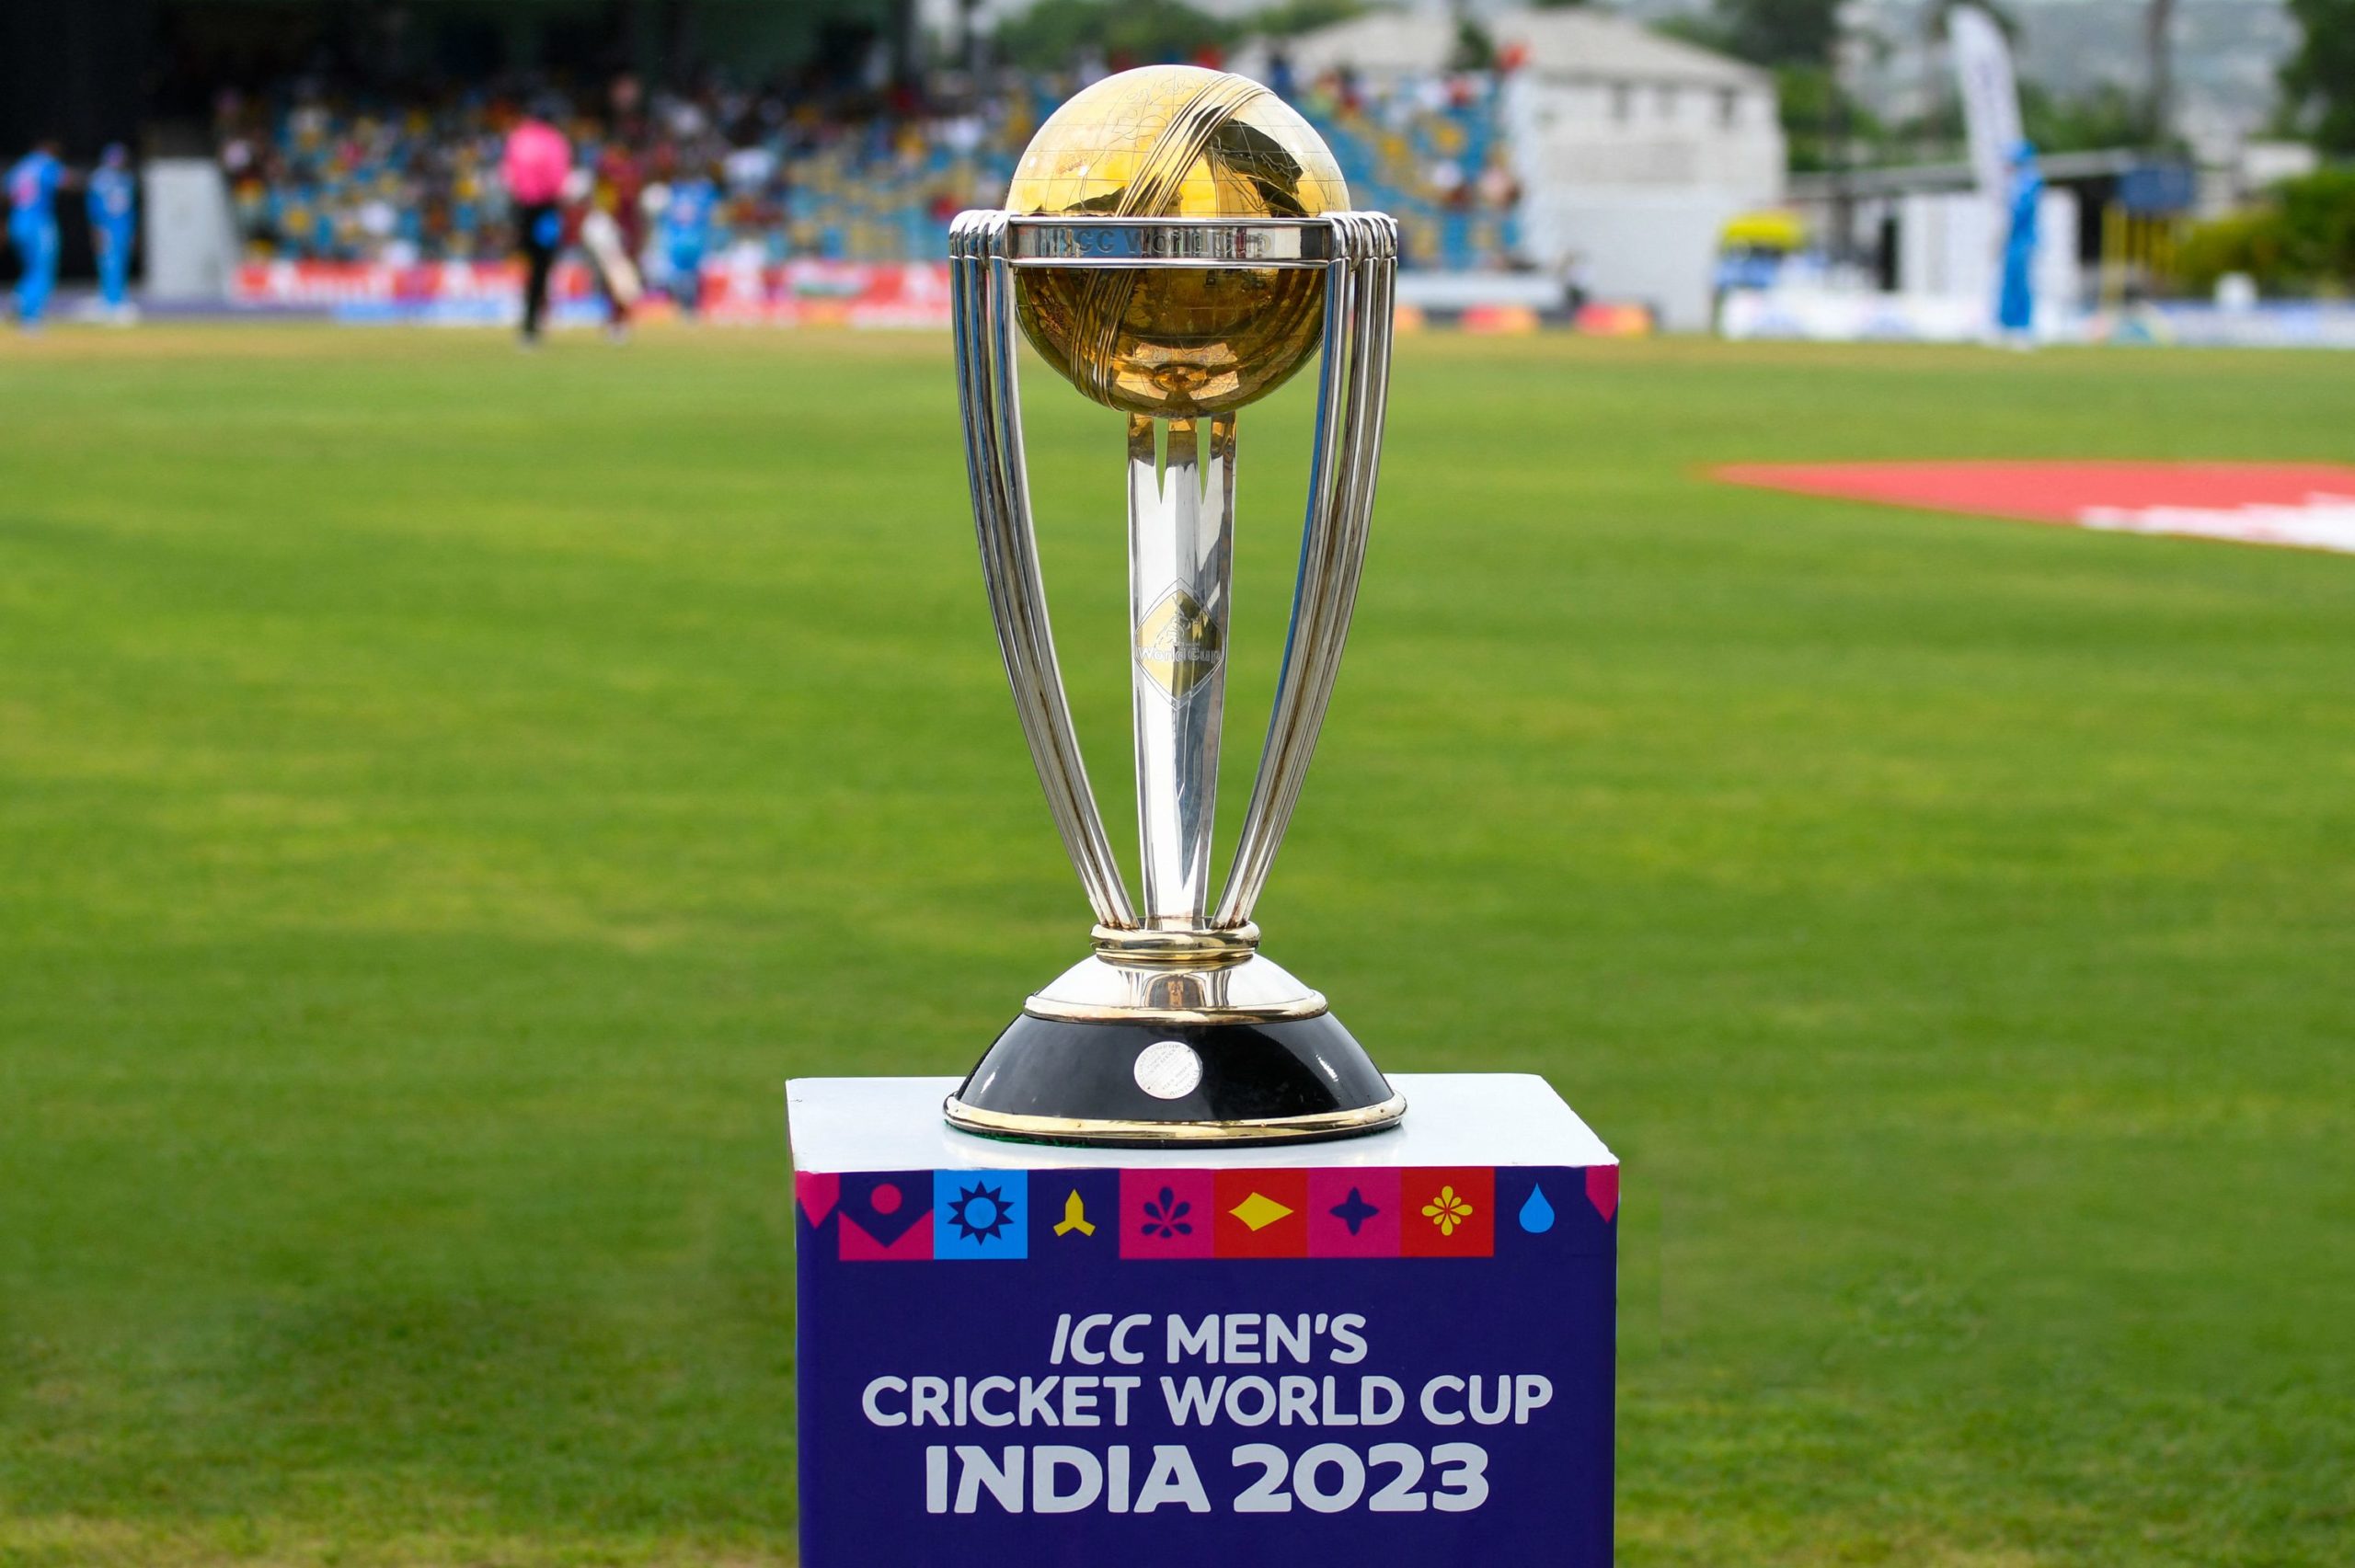 How to watch the ICC World Cup 2023